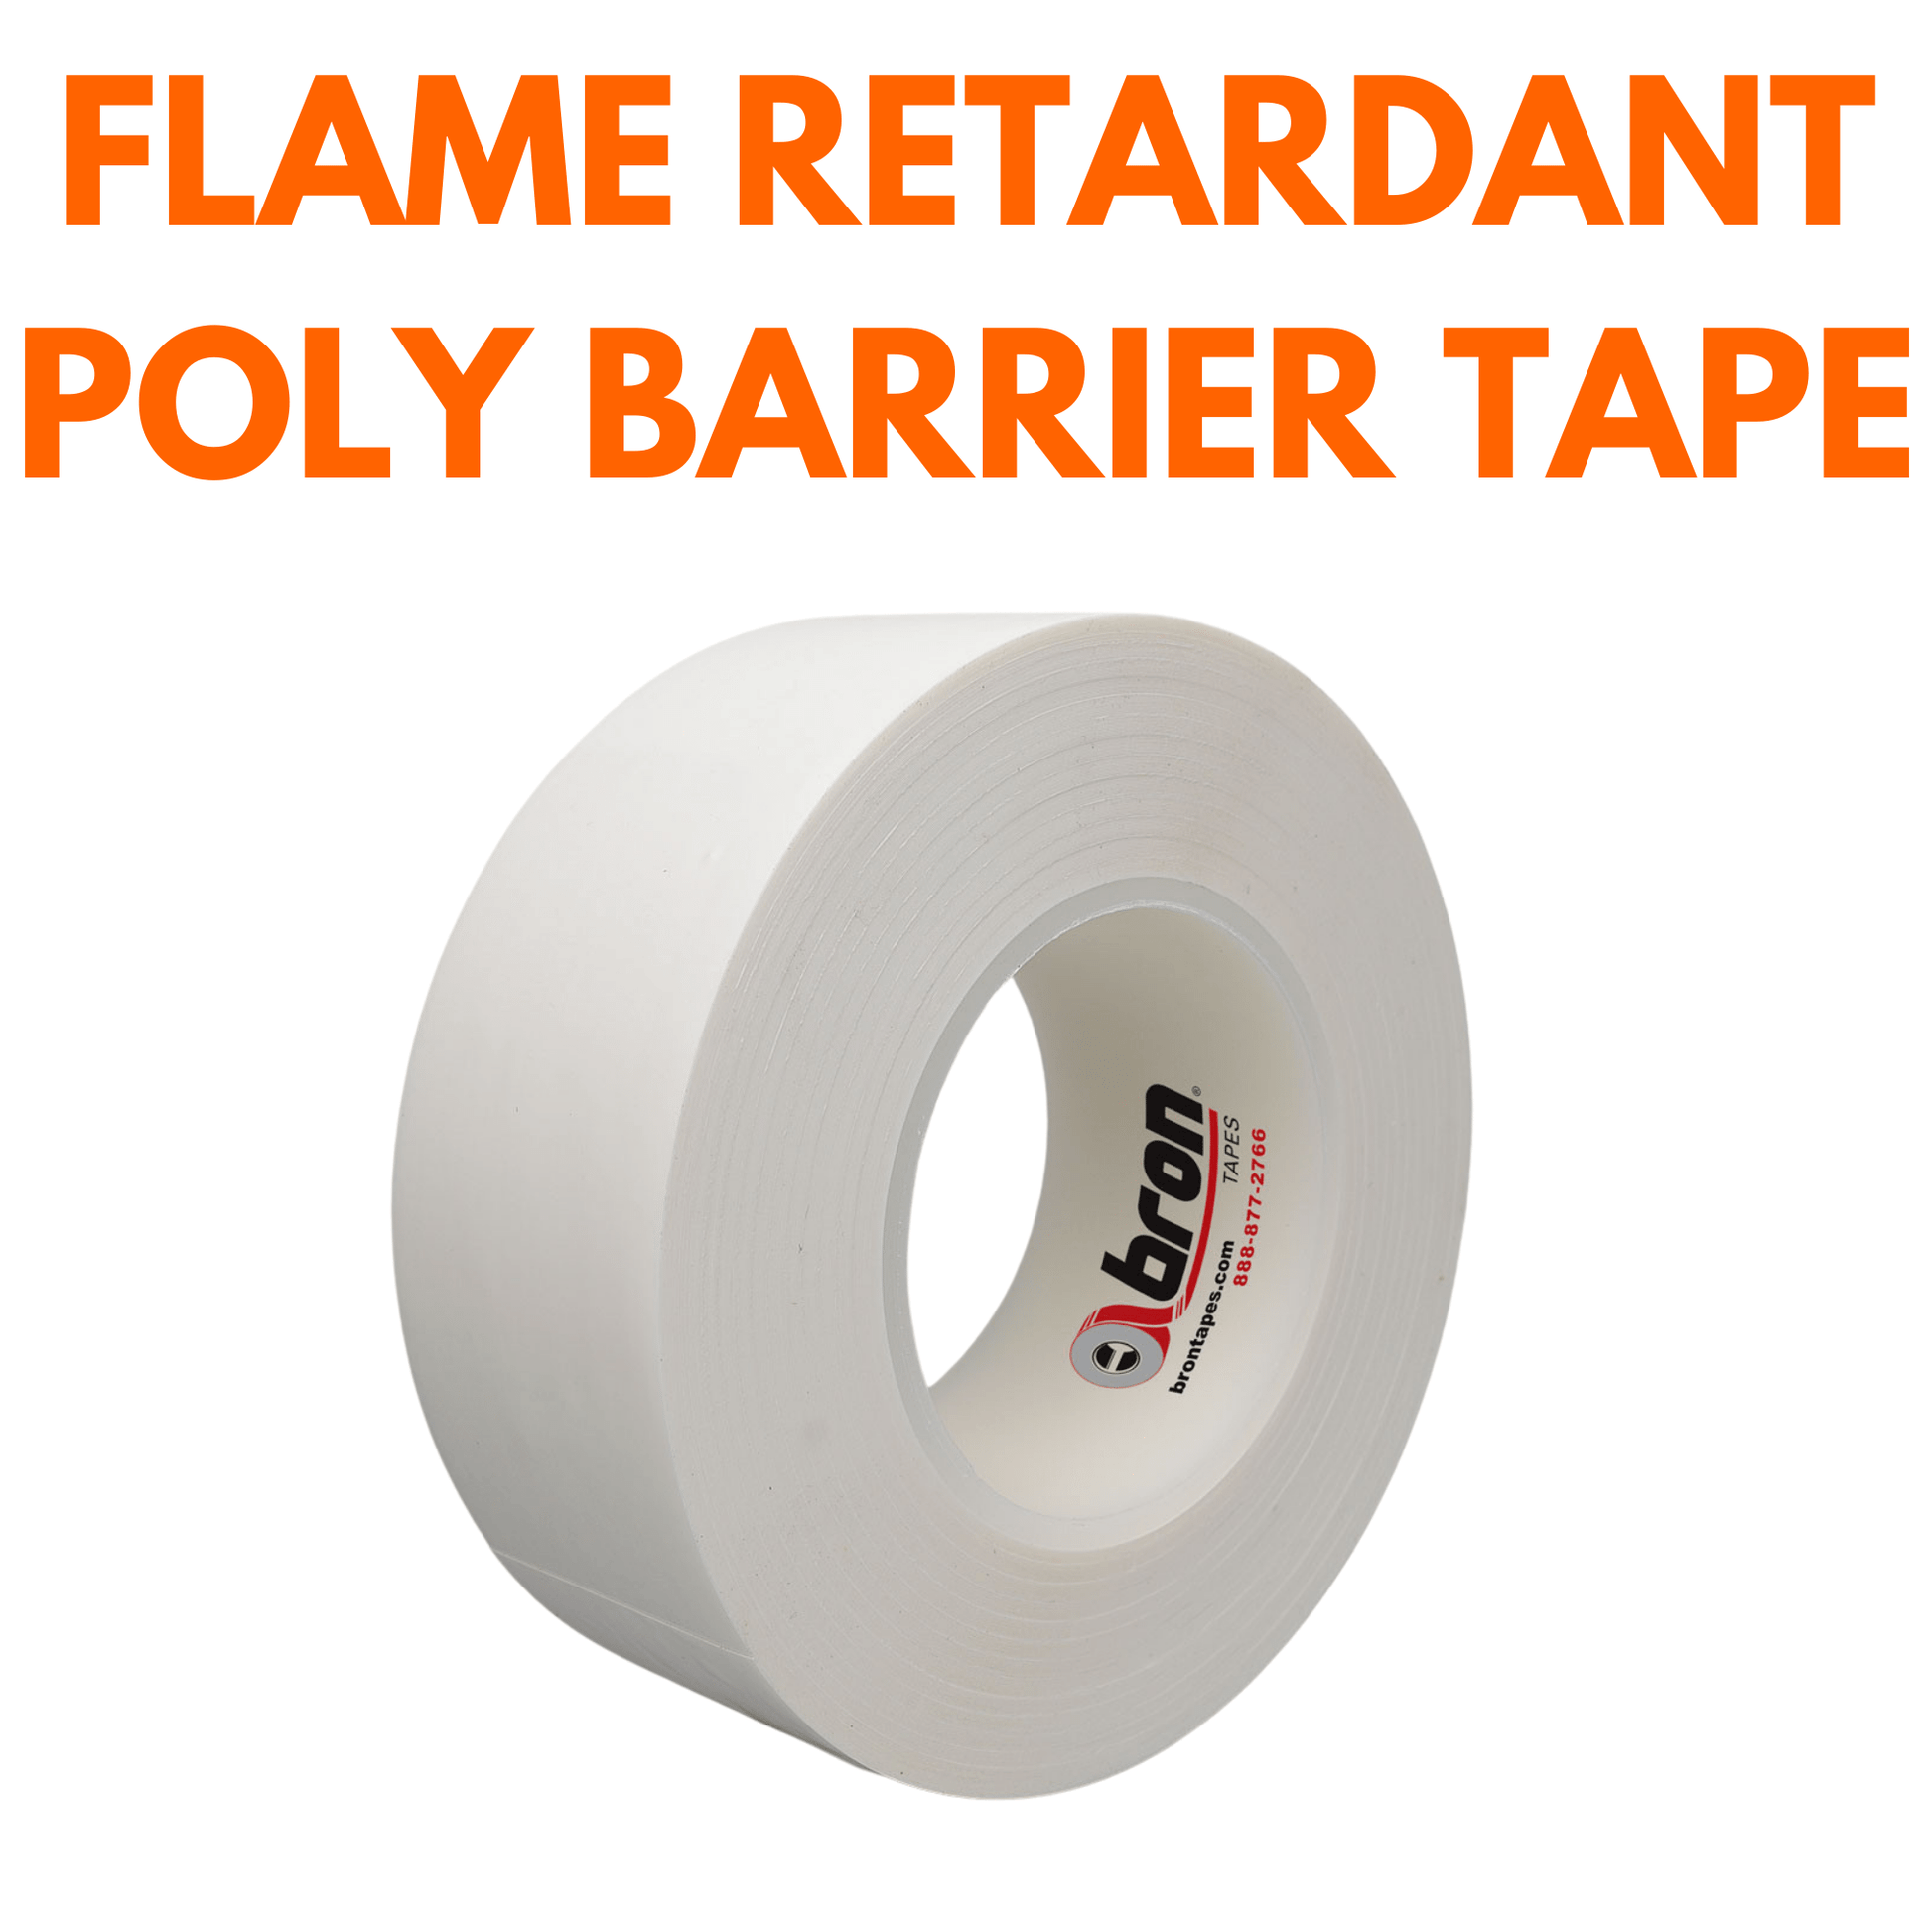 RE-U-ZIP INNOVATIVE DUST BARRIER SOLUTIONS Construction FLAME RETARDANT POLY BARRIER TAPE